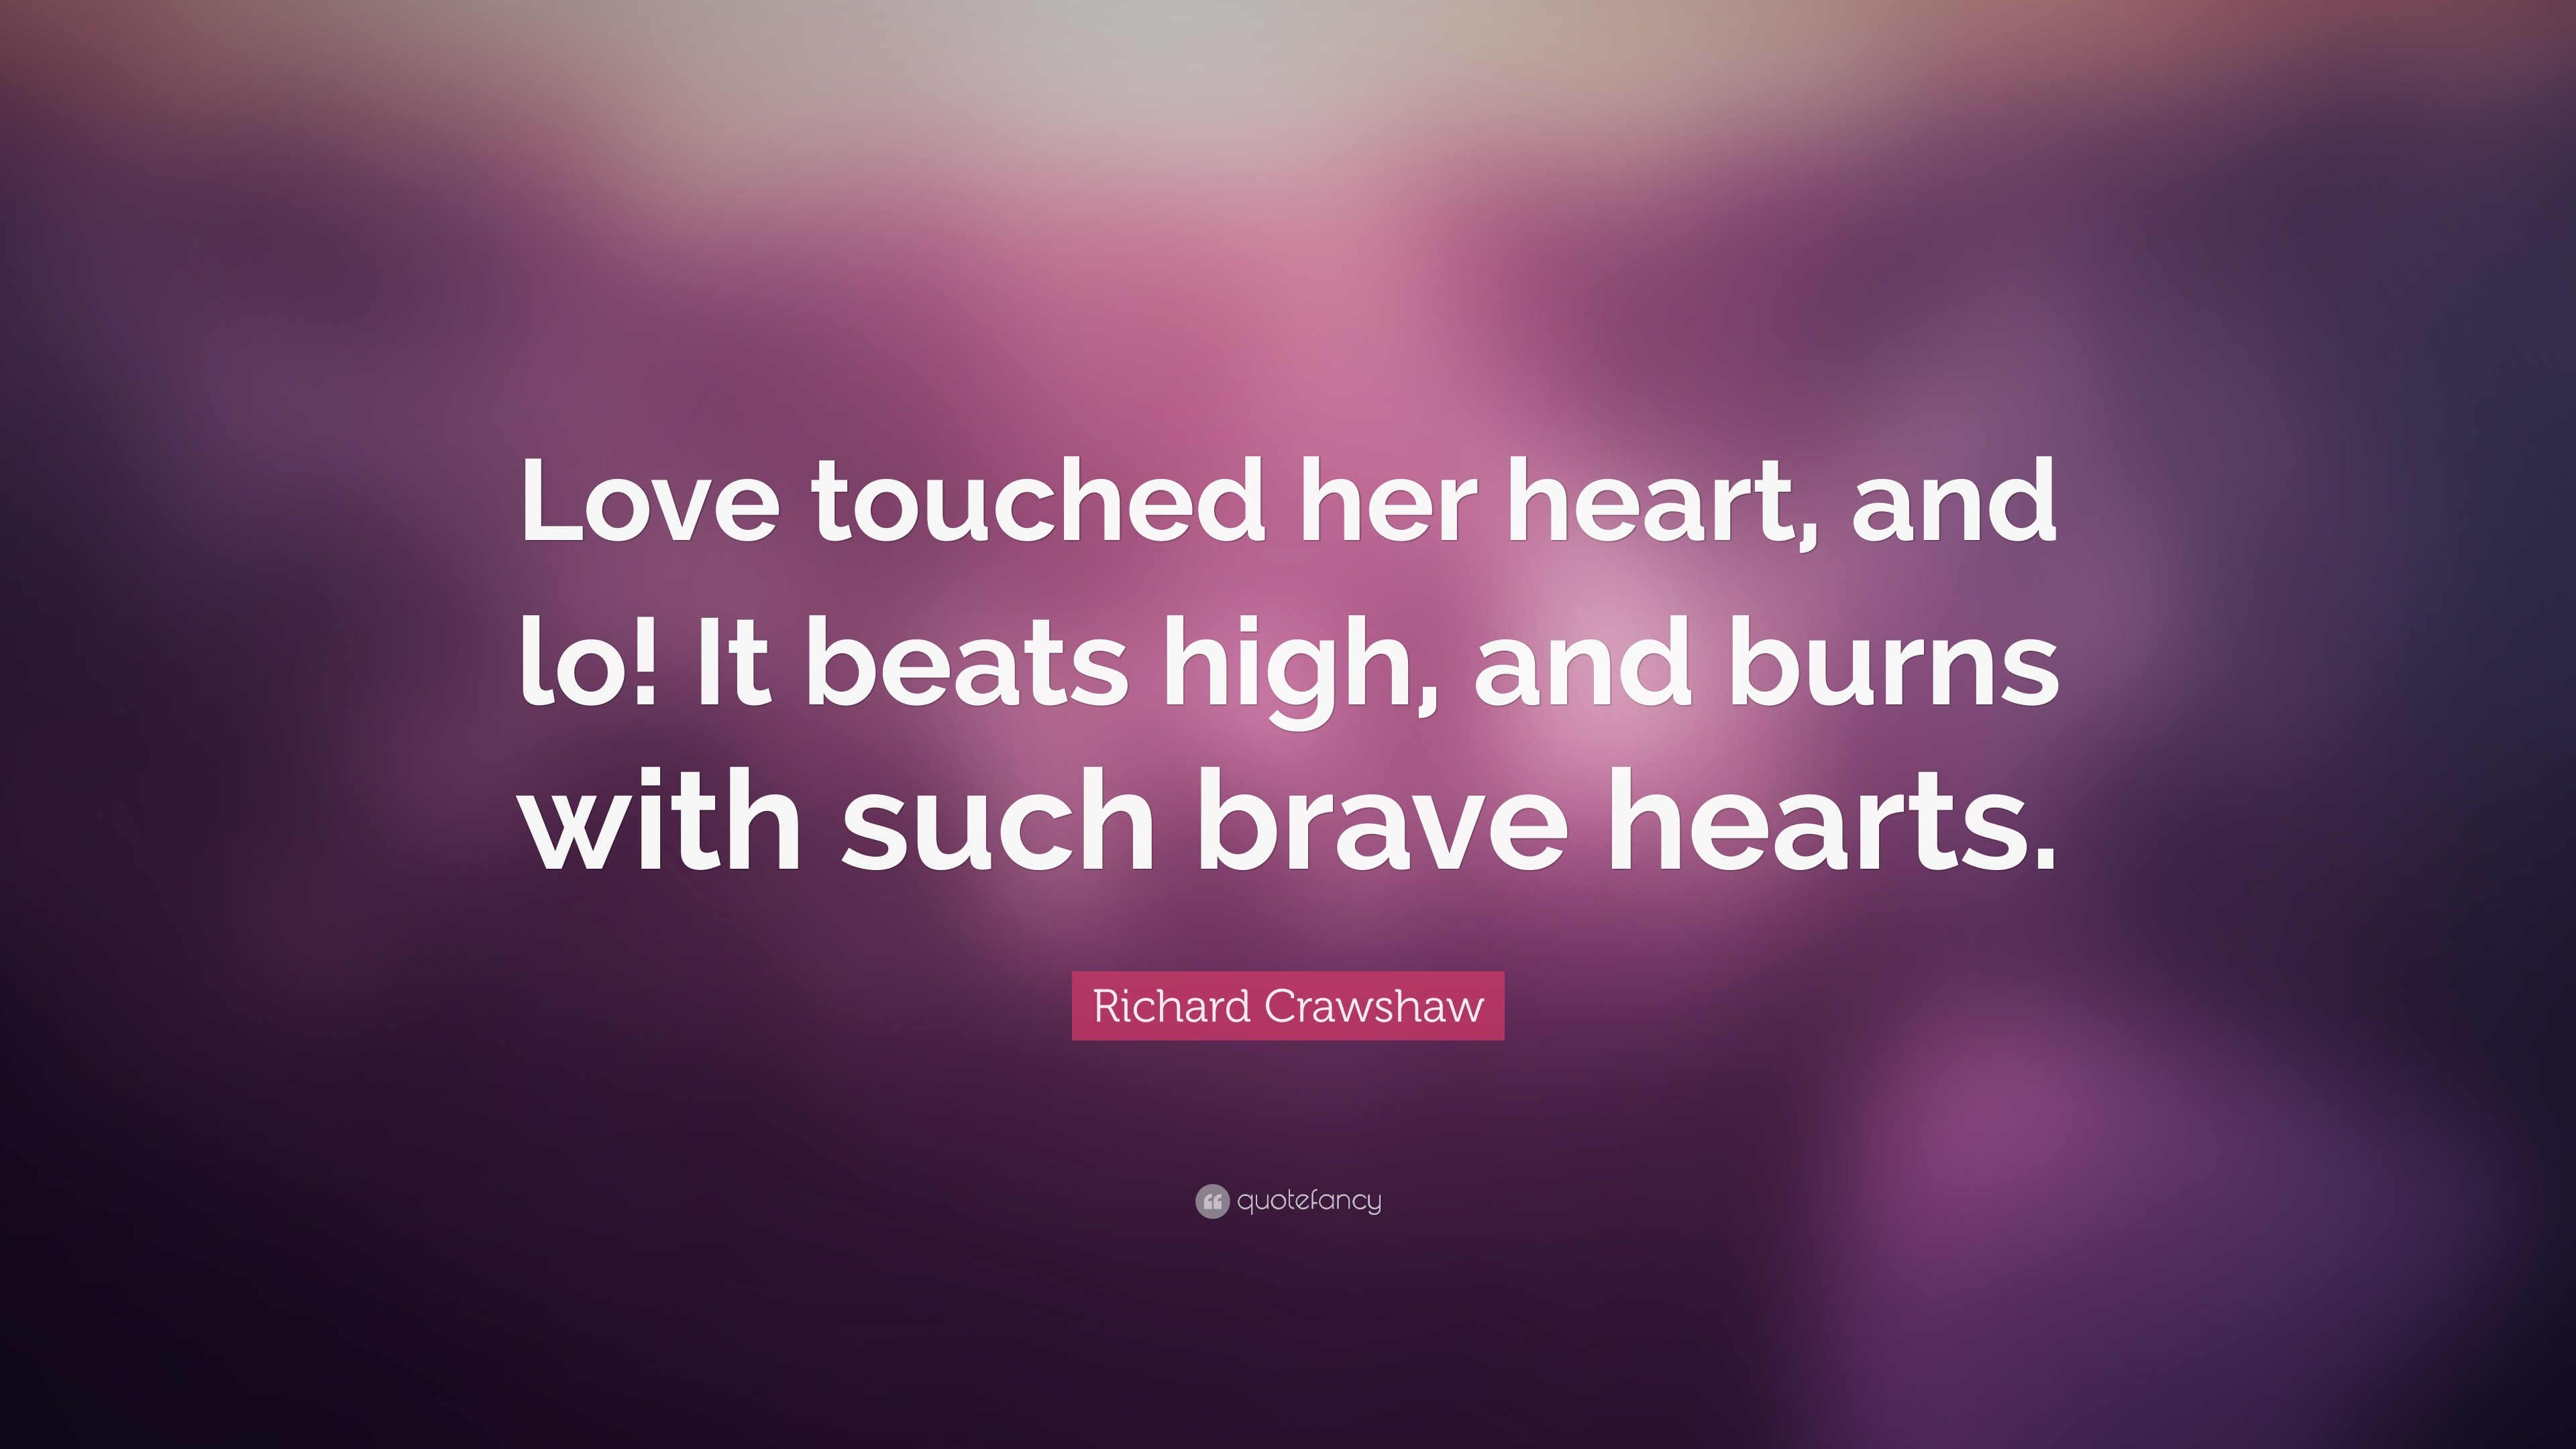 Richard Crawshaw Quote: “Love touched her heart, and lo! It beats high ...